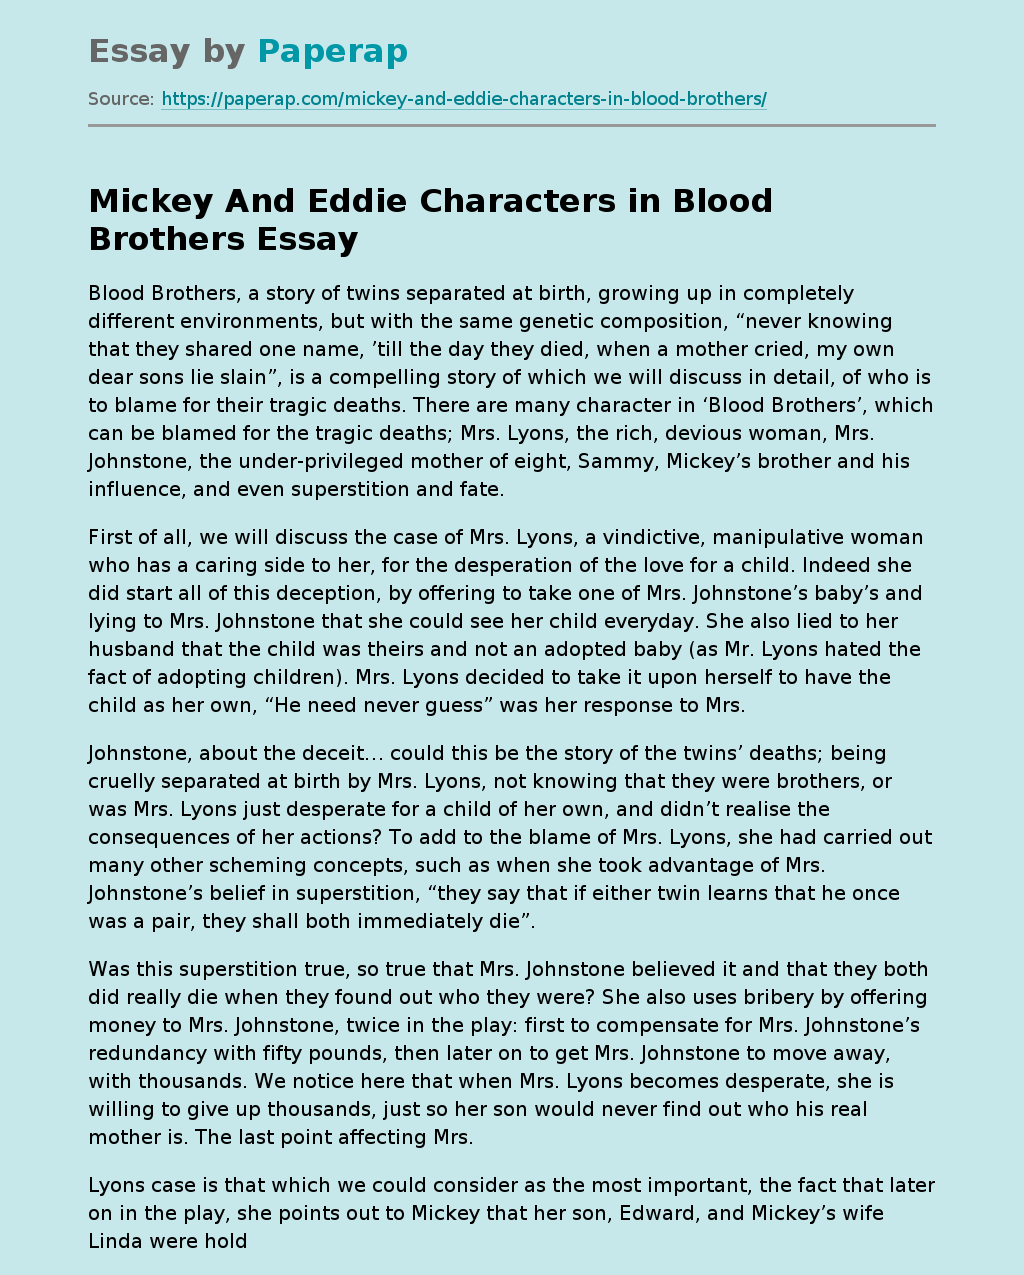 Mickey And Eddie Characters in Blood Brothers